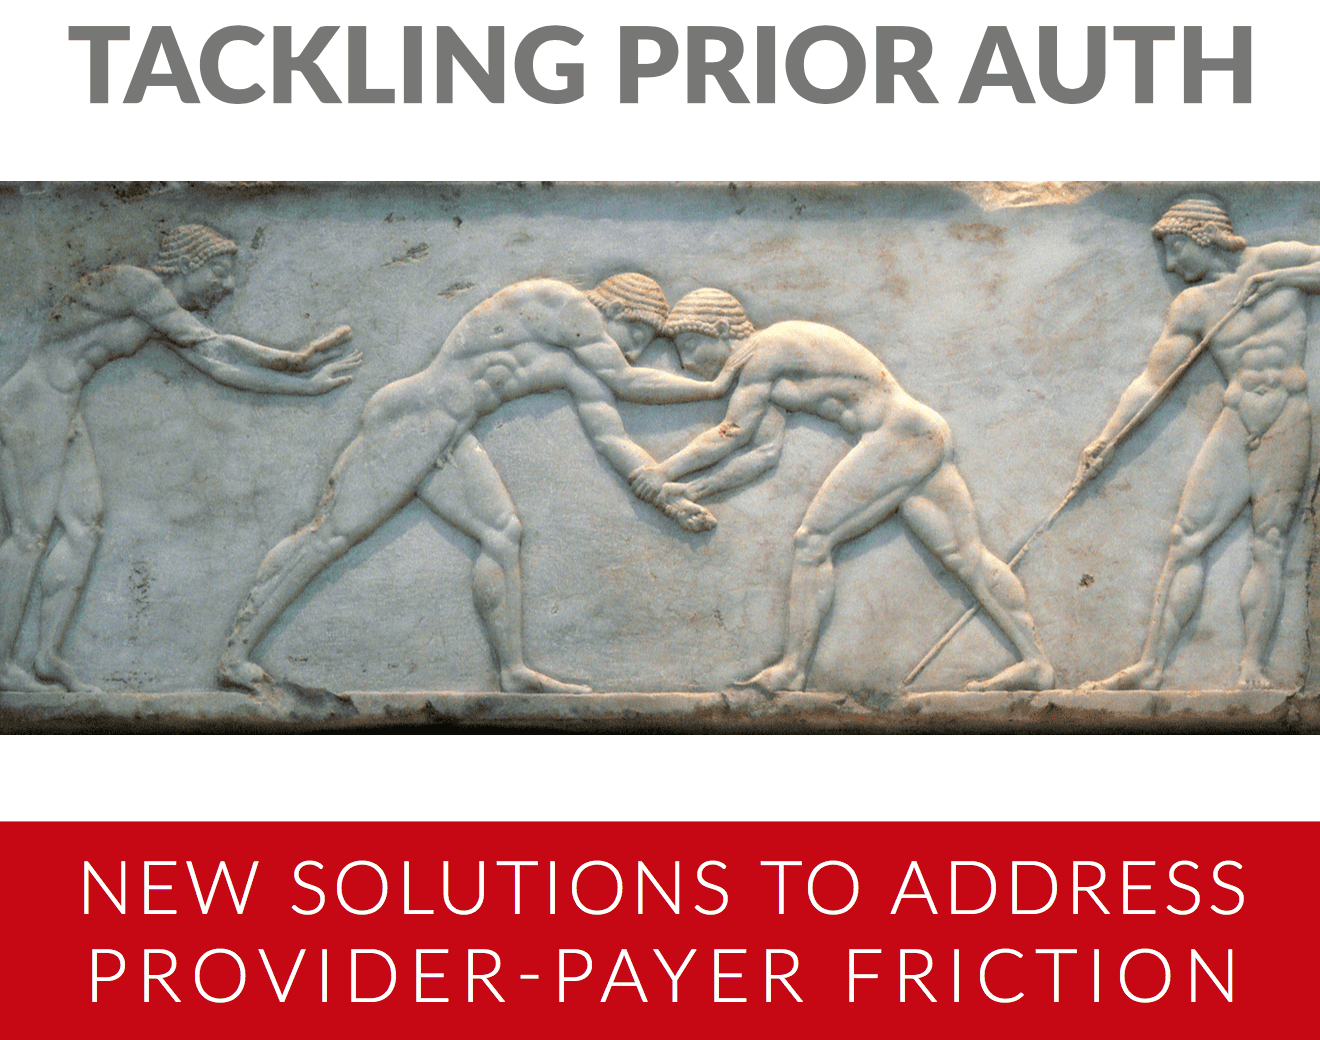 Tackling Prior Auth: New Solutions to Address Provider-Payer Friction